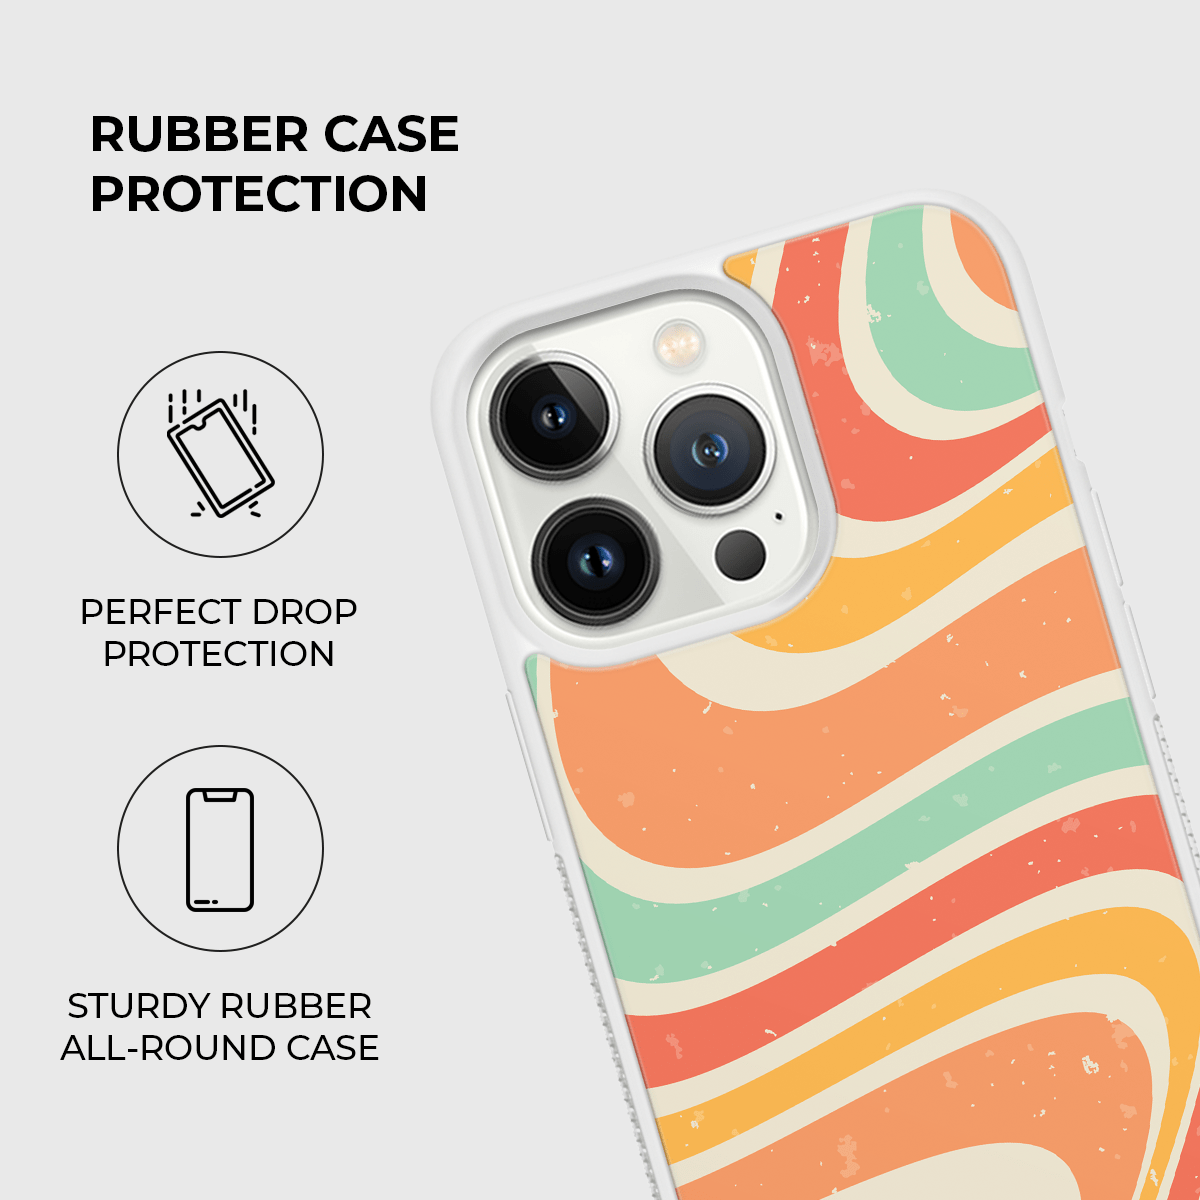 Groovy Baby Rubber Phone Case